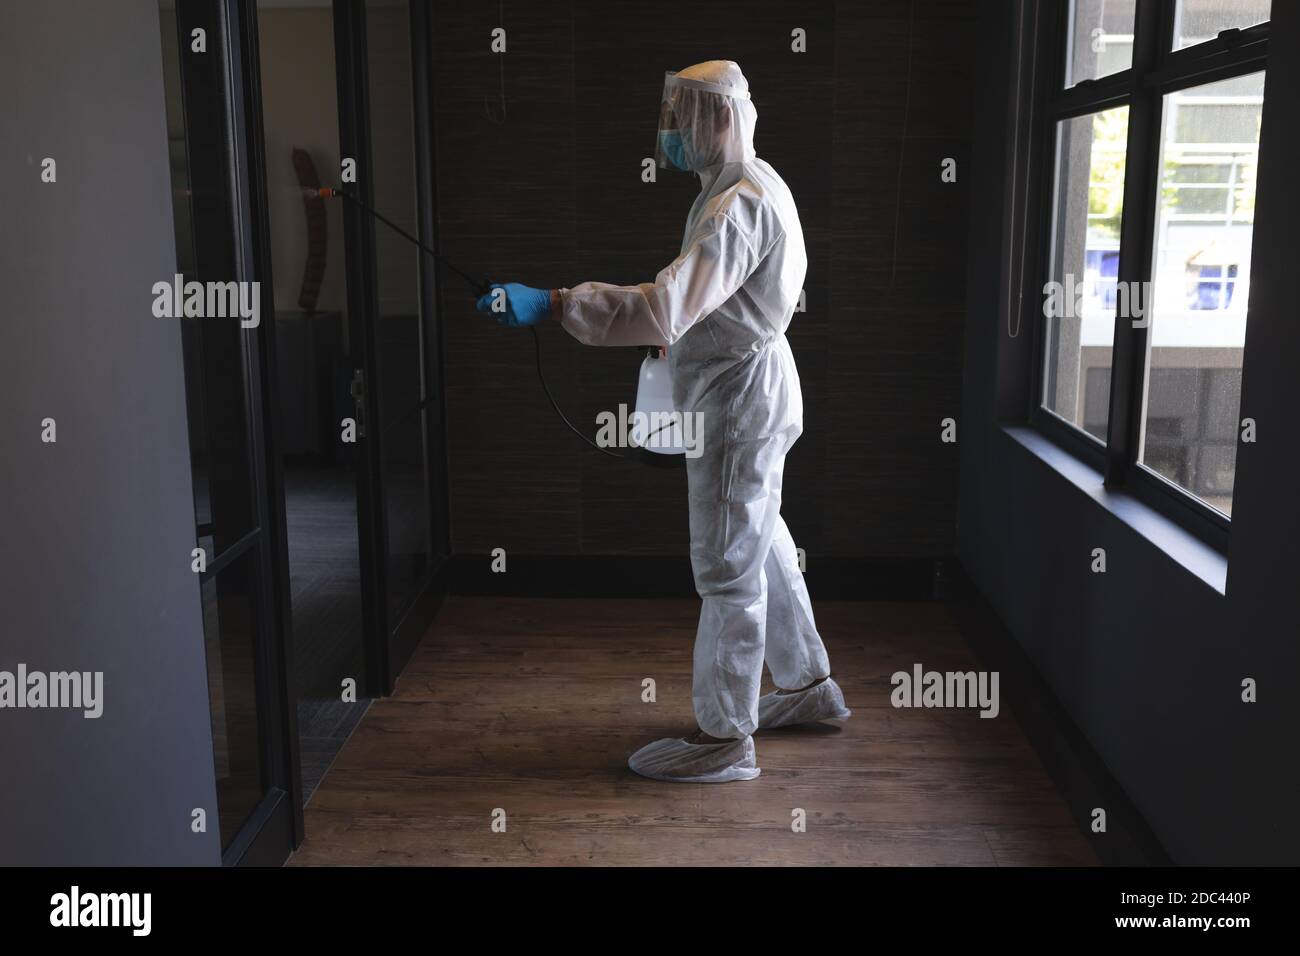 Health worker wearing protective clothes cleaning office using disinfectant Stock Photo